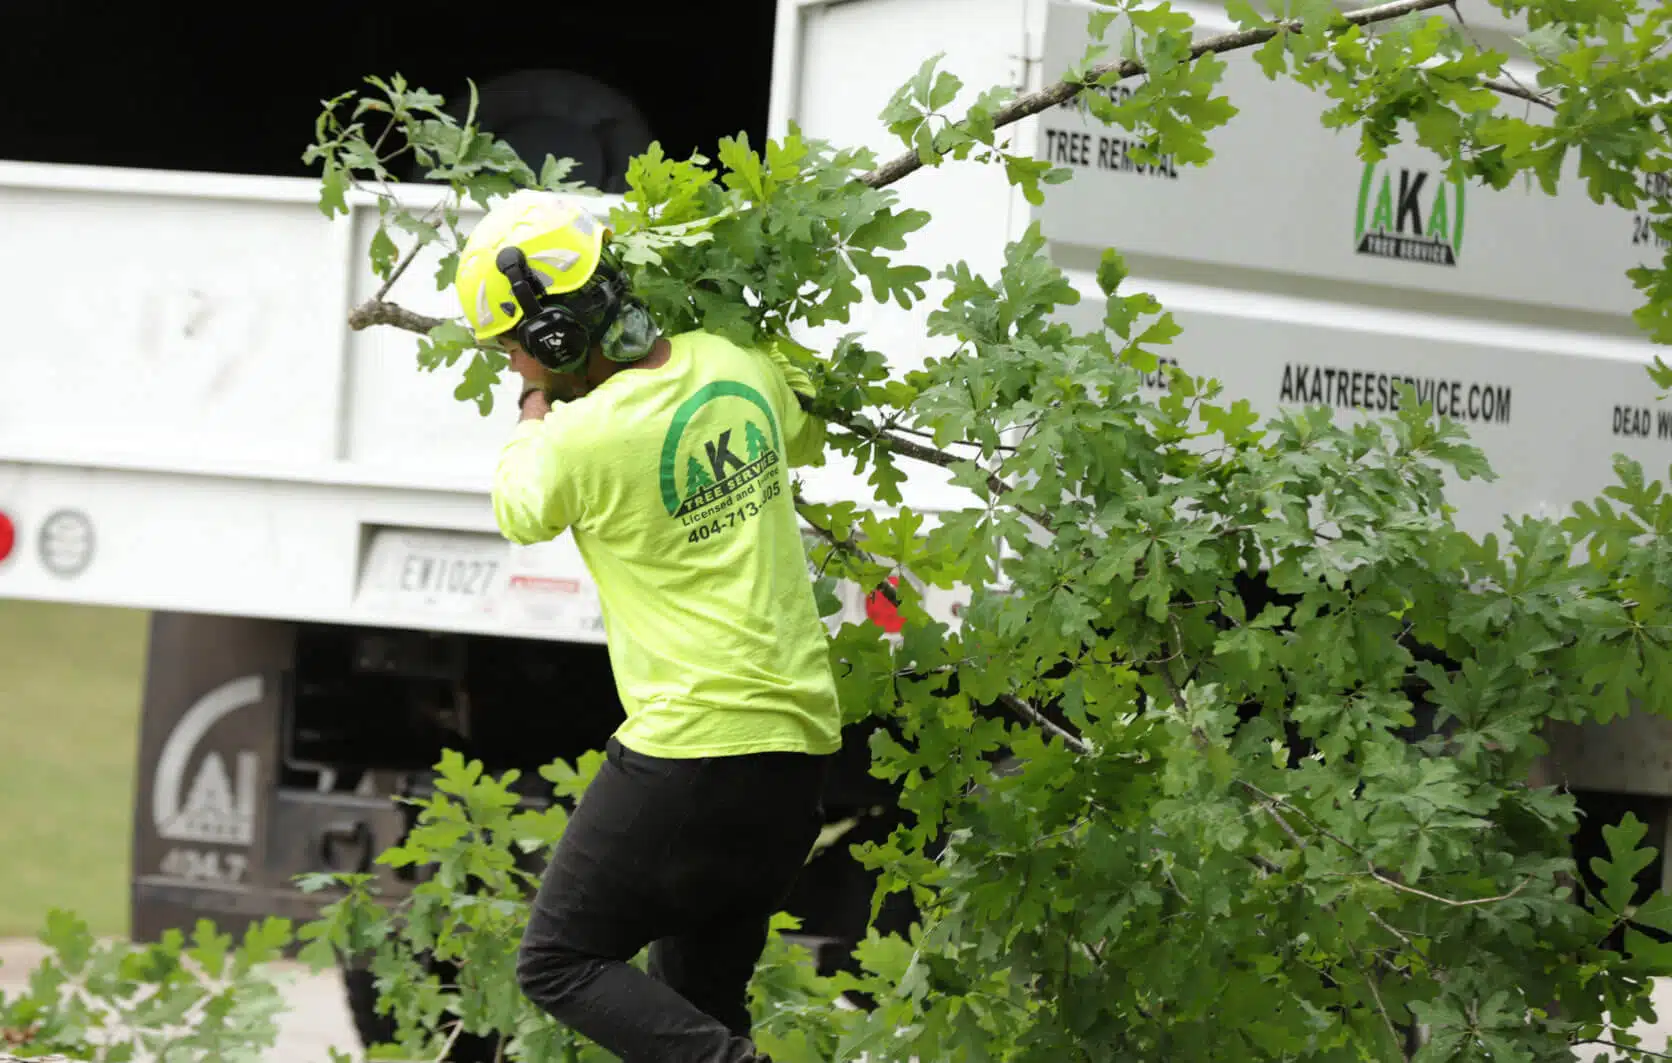 AKA Tree Service: The Only Partner You Need For Tree Care